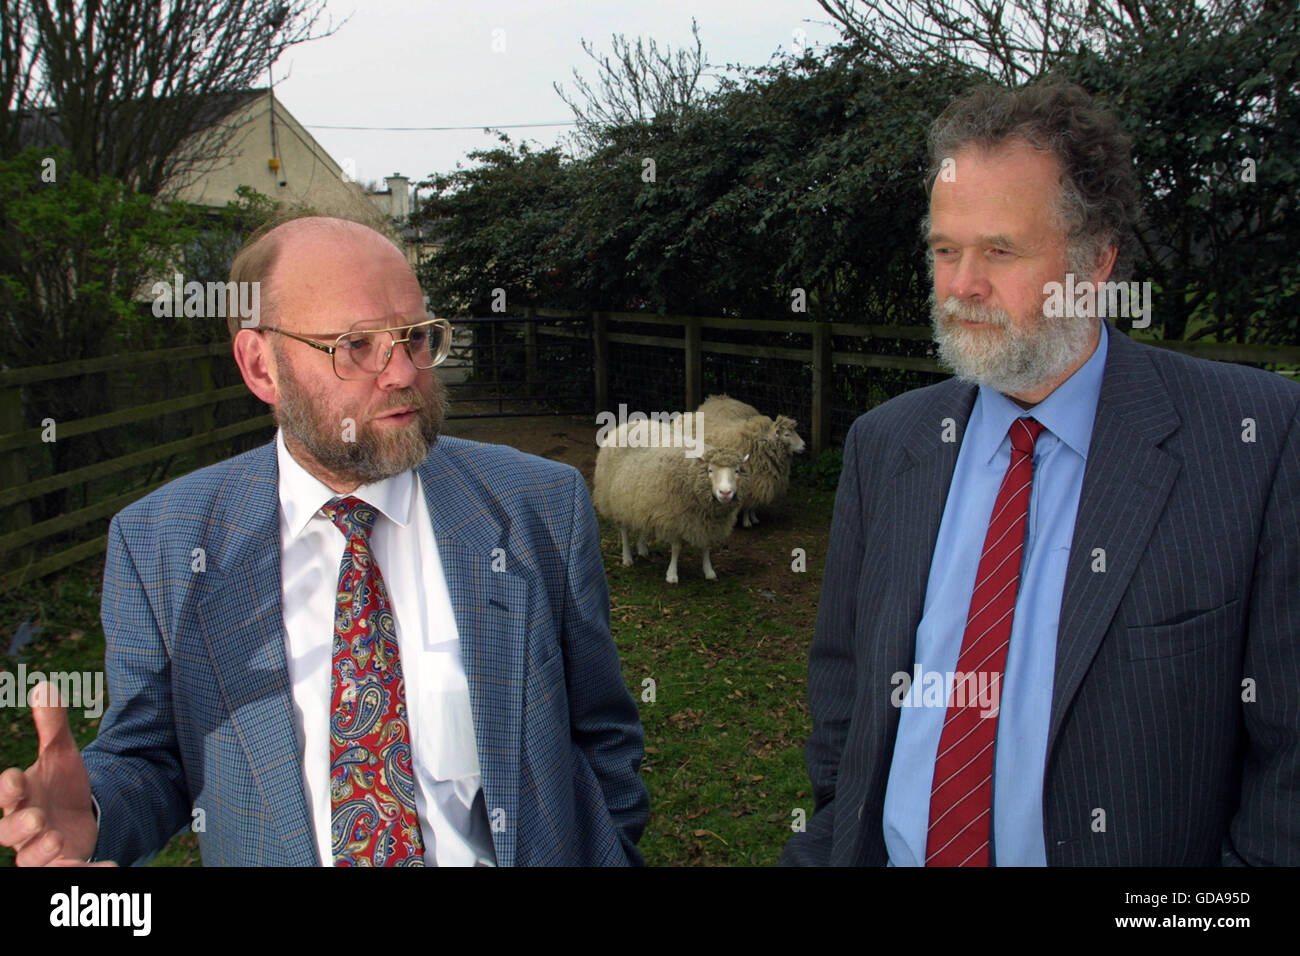 Dr Ian Wilmut (left) and Dr Harry Griffin, two of the scientists behind the development of Dolly (pictured), the first genetically copied sheep, at Roslin Institute near Edinburgh where they work. Dolly was a female domestic sheep, and the first mammal cloned from an adult somatic cell, using the process of nuclear transfer. The photographs taken by Colin McPherson this day were the last before Dolly was euthanised  on 14 February 2003 because she had a progressive lung disease and severe arthritis. Stock Photo